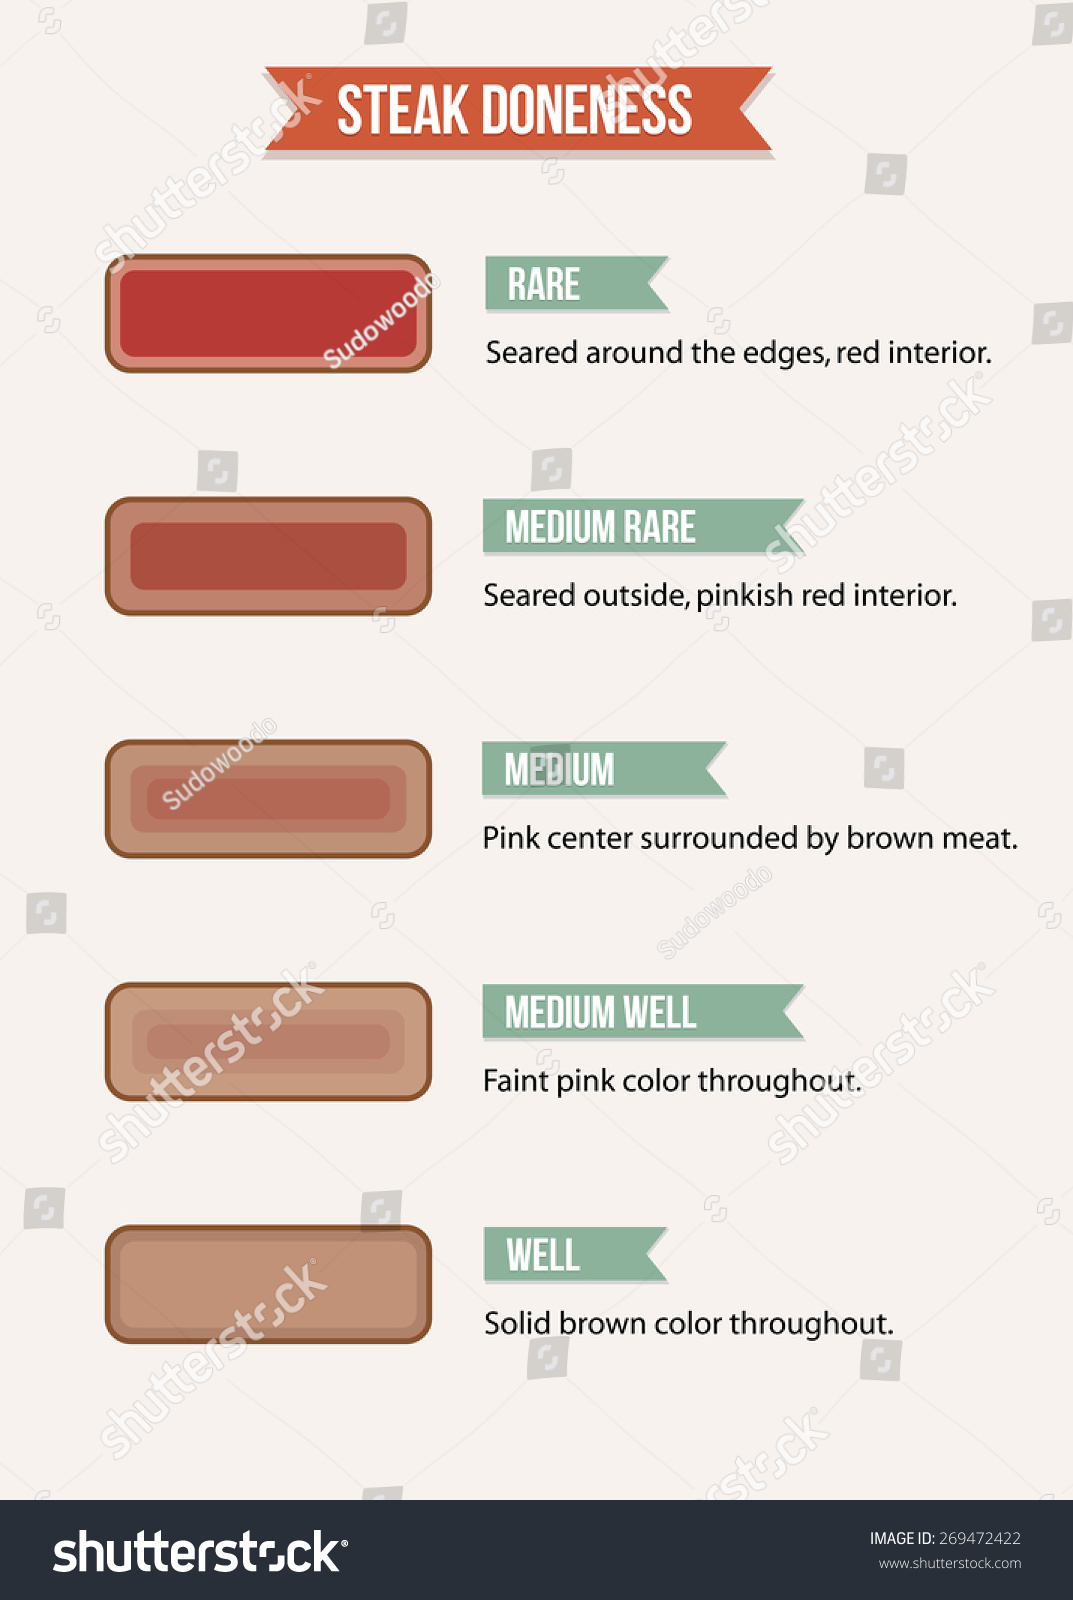 Infographic Chart Steak Doneness Characteristics Rare Stock Vector 123552 Hot Sex Picture 